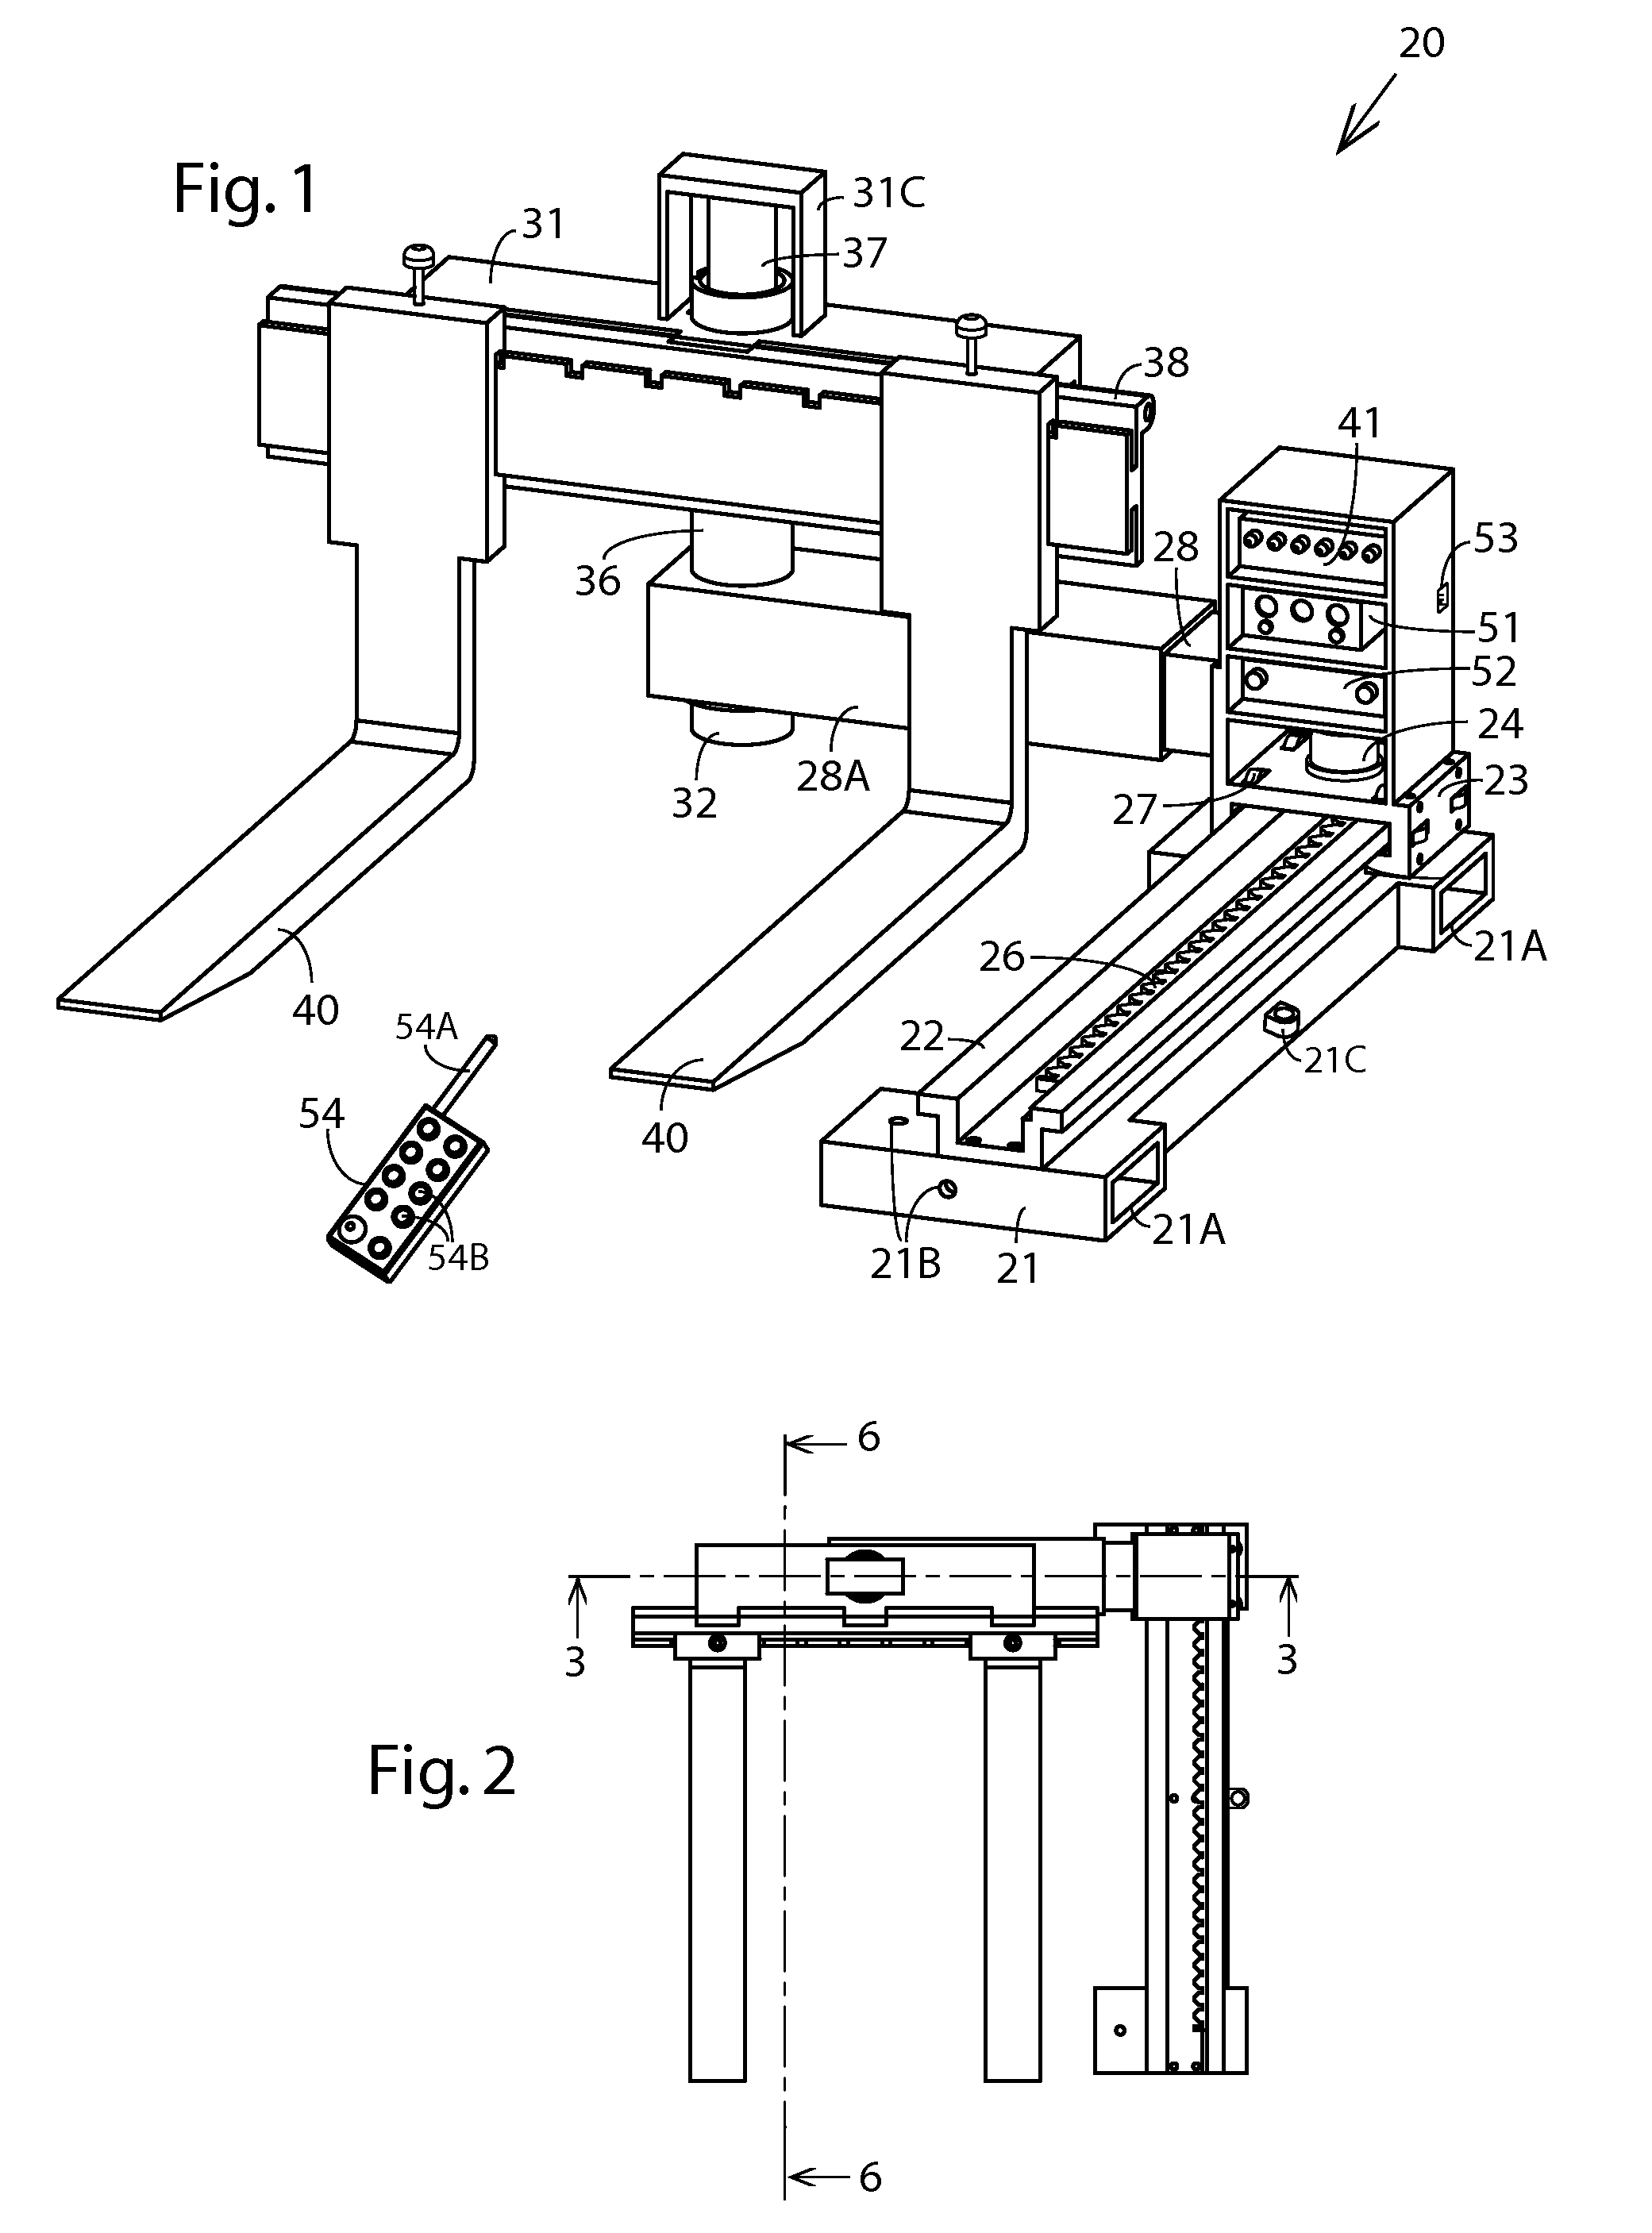 Side loading attachment for forklift trucks and the like